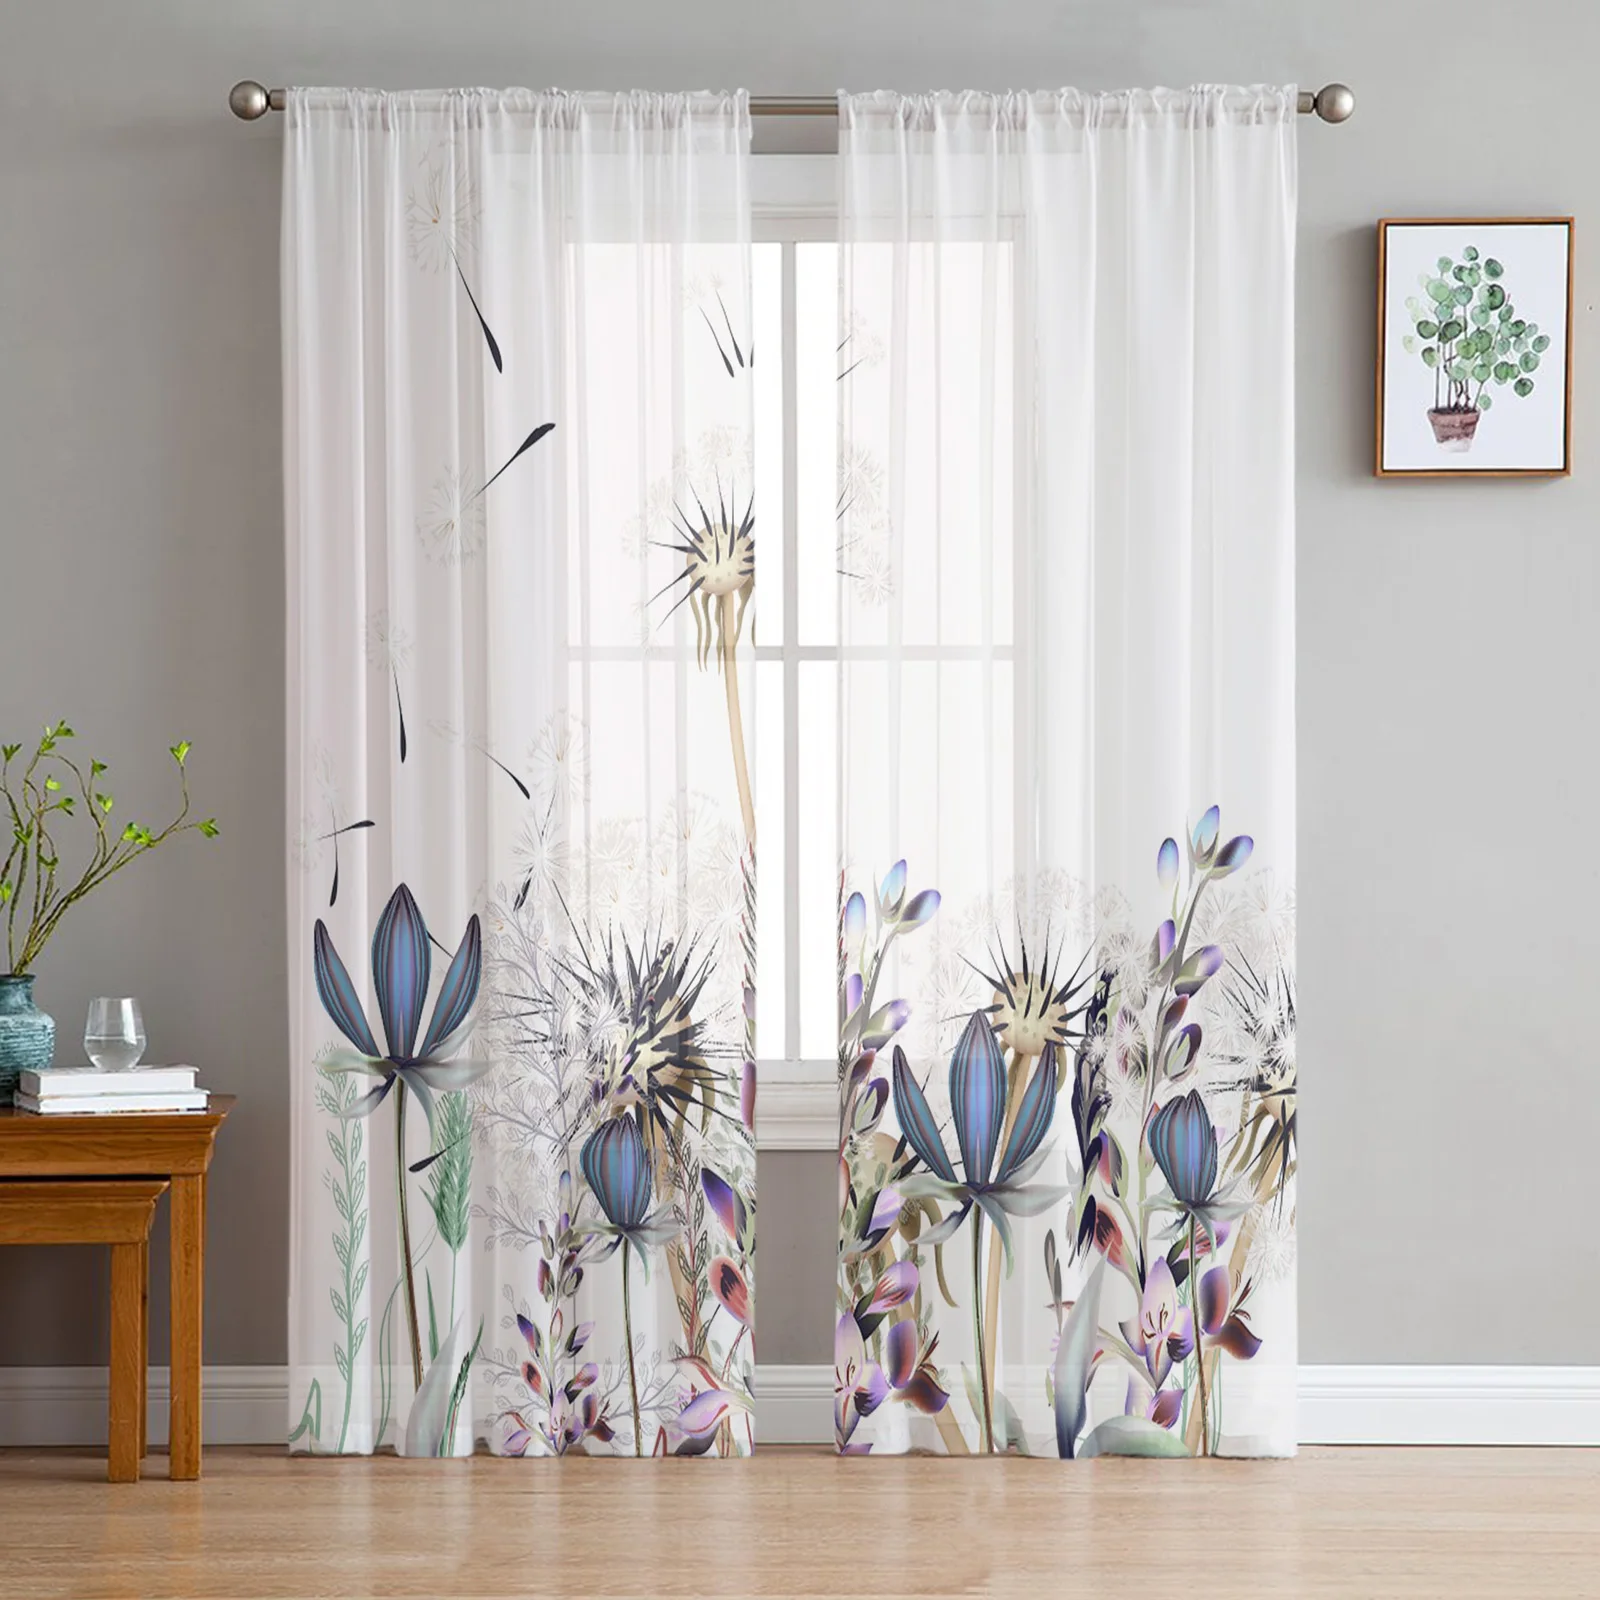 

Dandelion Flower Watercolor Painting Sheer Curtains for Living Room Voile Curtain Bedroom Bathroom Tulle Curtains Window Drapes